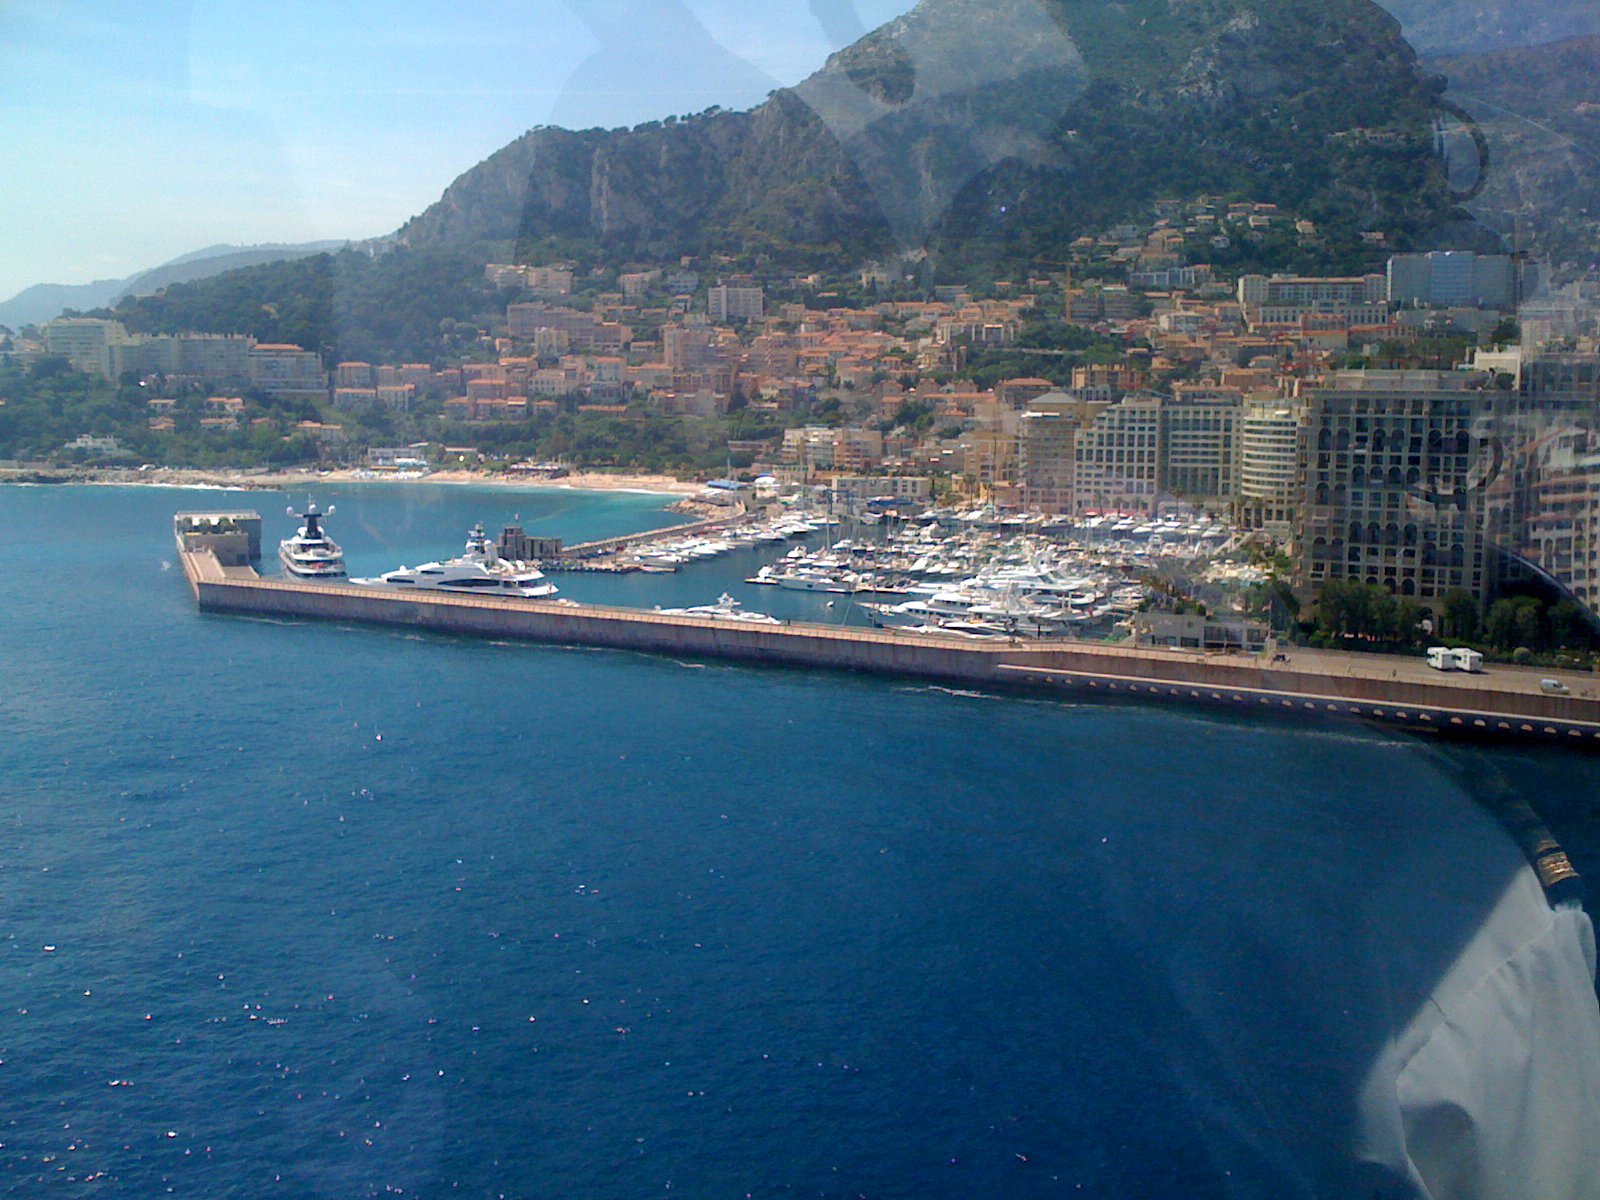 Flying into Monaco by helicopter!